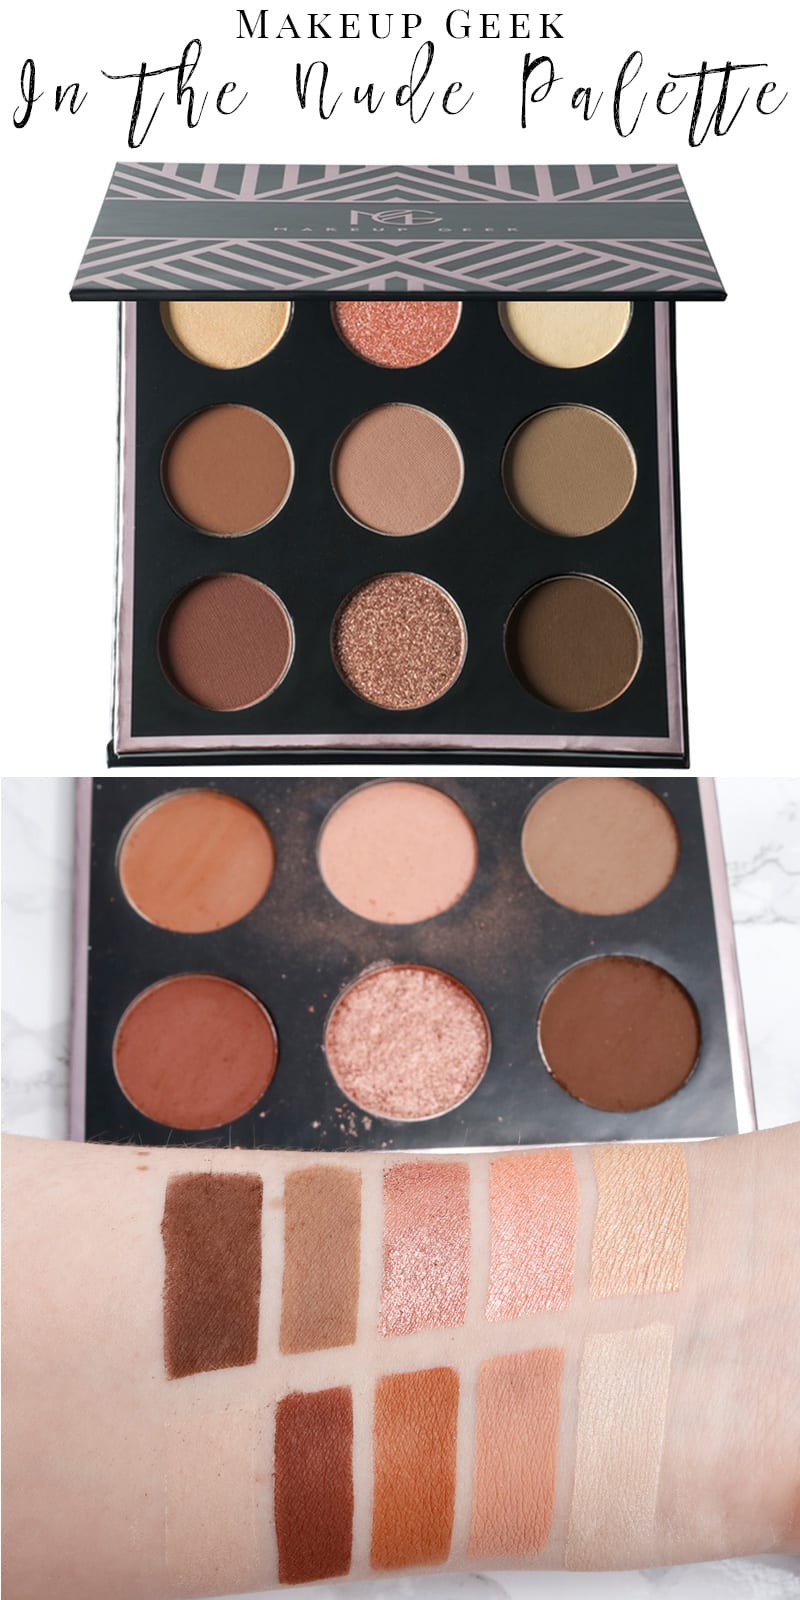 Makeup Geek In the Palette & Swatches on Pale